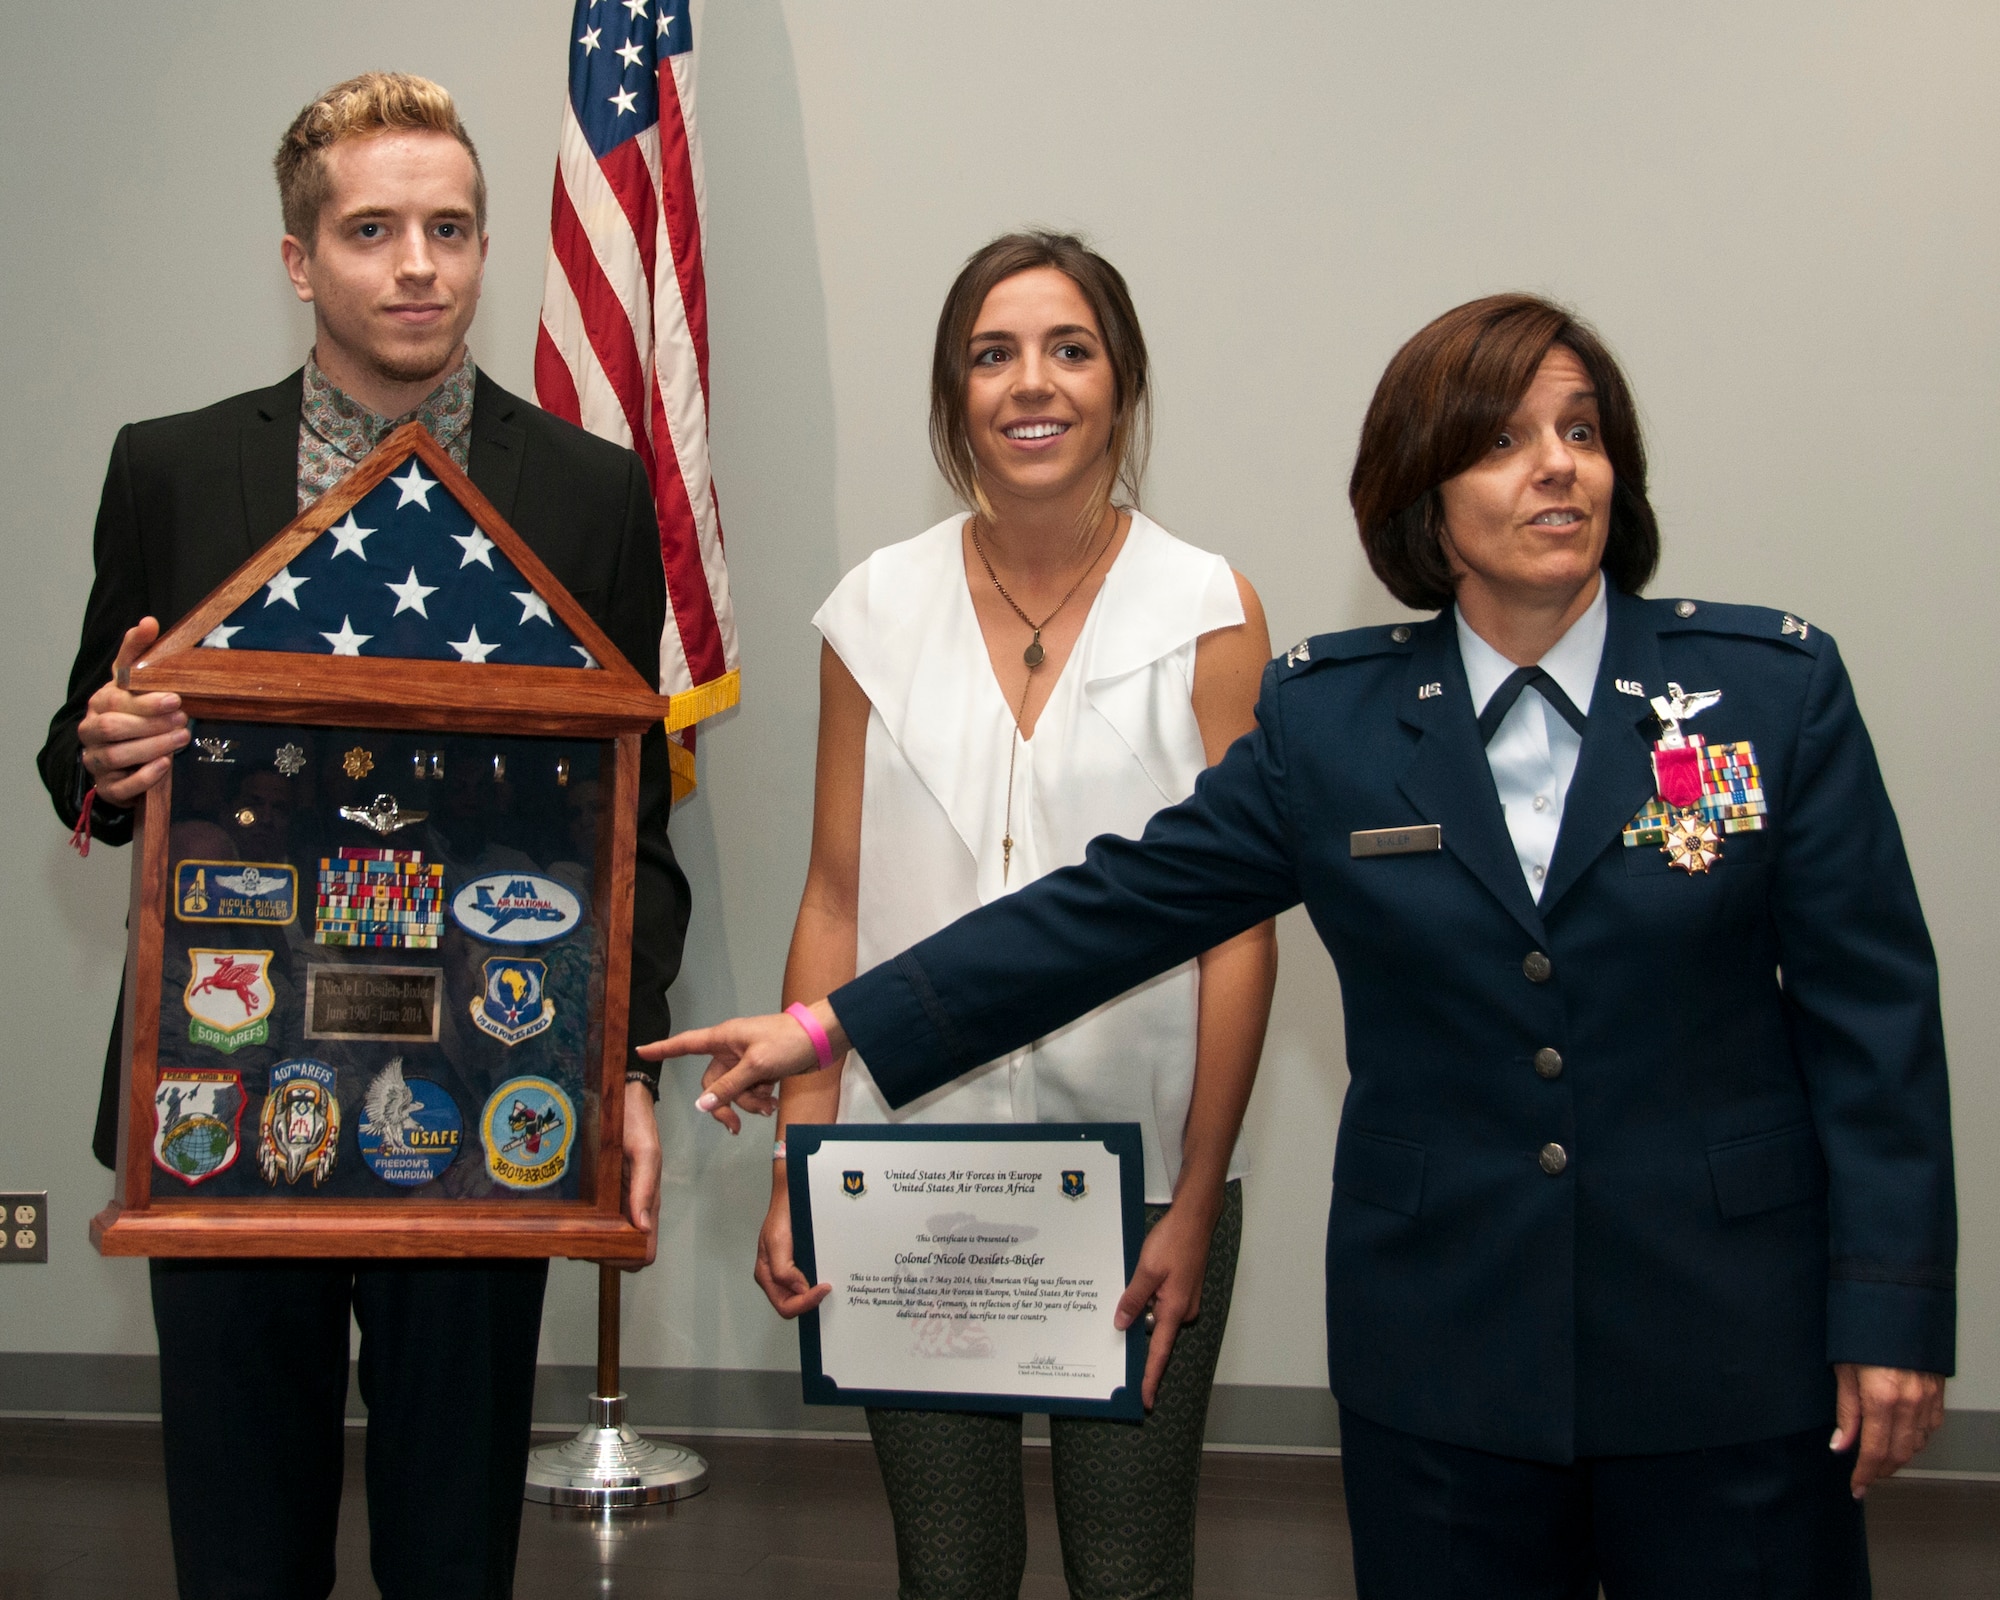 PEASE AIR NATIONAL GUARD BASE, N.H—Col. Nicole L. Desilets-Bixler  speaks about her shadow box that she was presented during her  during her retirement ceremony in building 264, on June 8, 2014. Bixler retires after 34 years of service and she has the distinction of being on the first N.H. Guard all-female flight crew which flew veterans to the Woman's memorial in Washington D.C. for its dedication. Her children, Robbie and Genevieve look on. (U.S. Air National Guard photo by Staff Sgt. Curtis J. Lenz) 